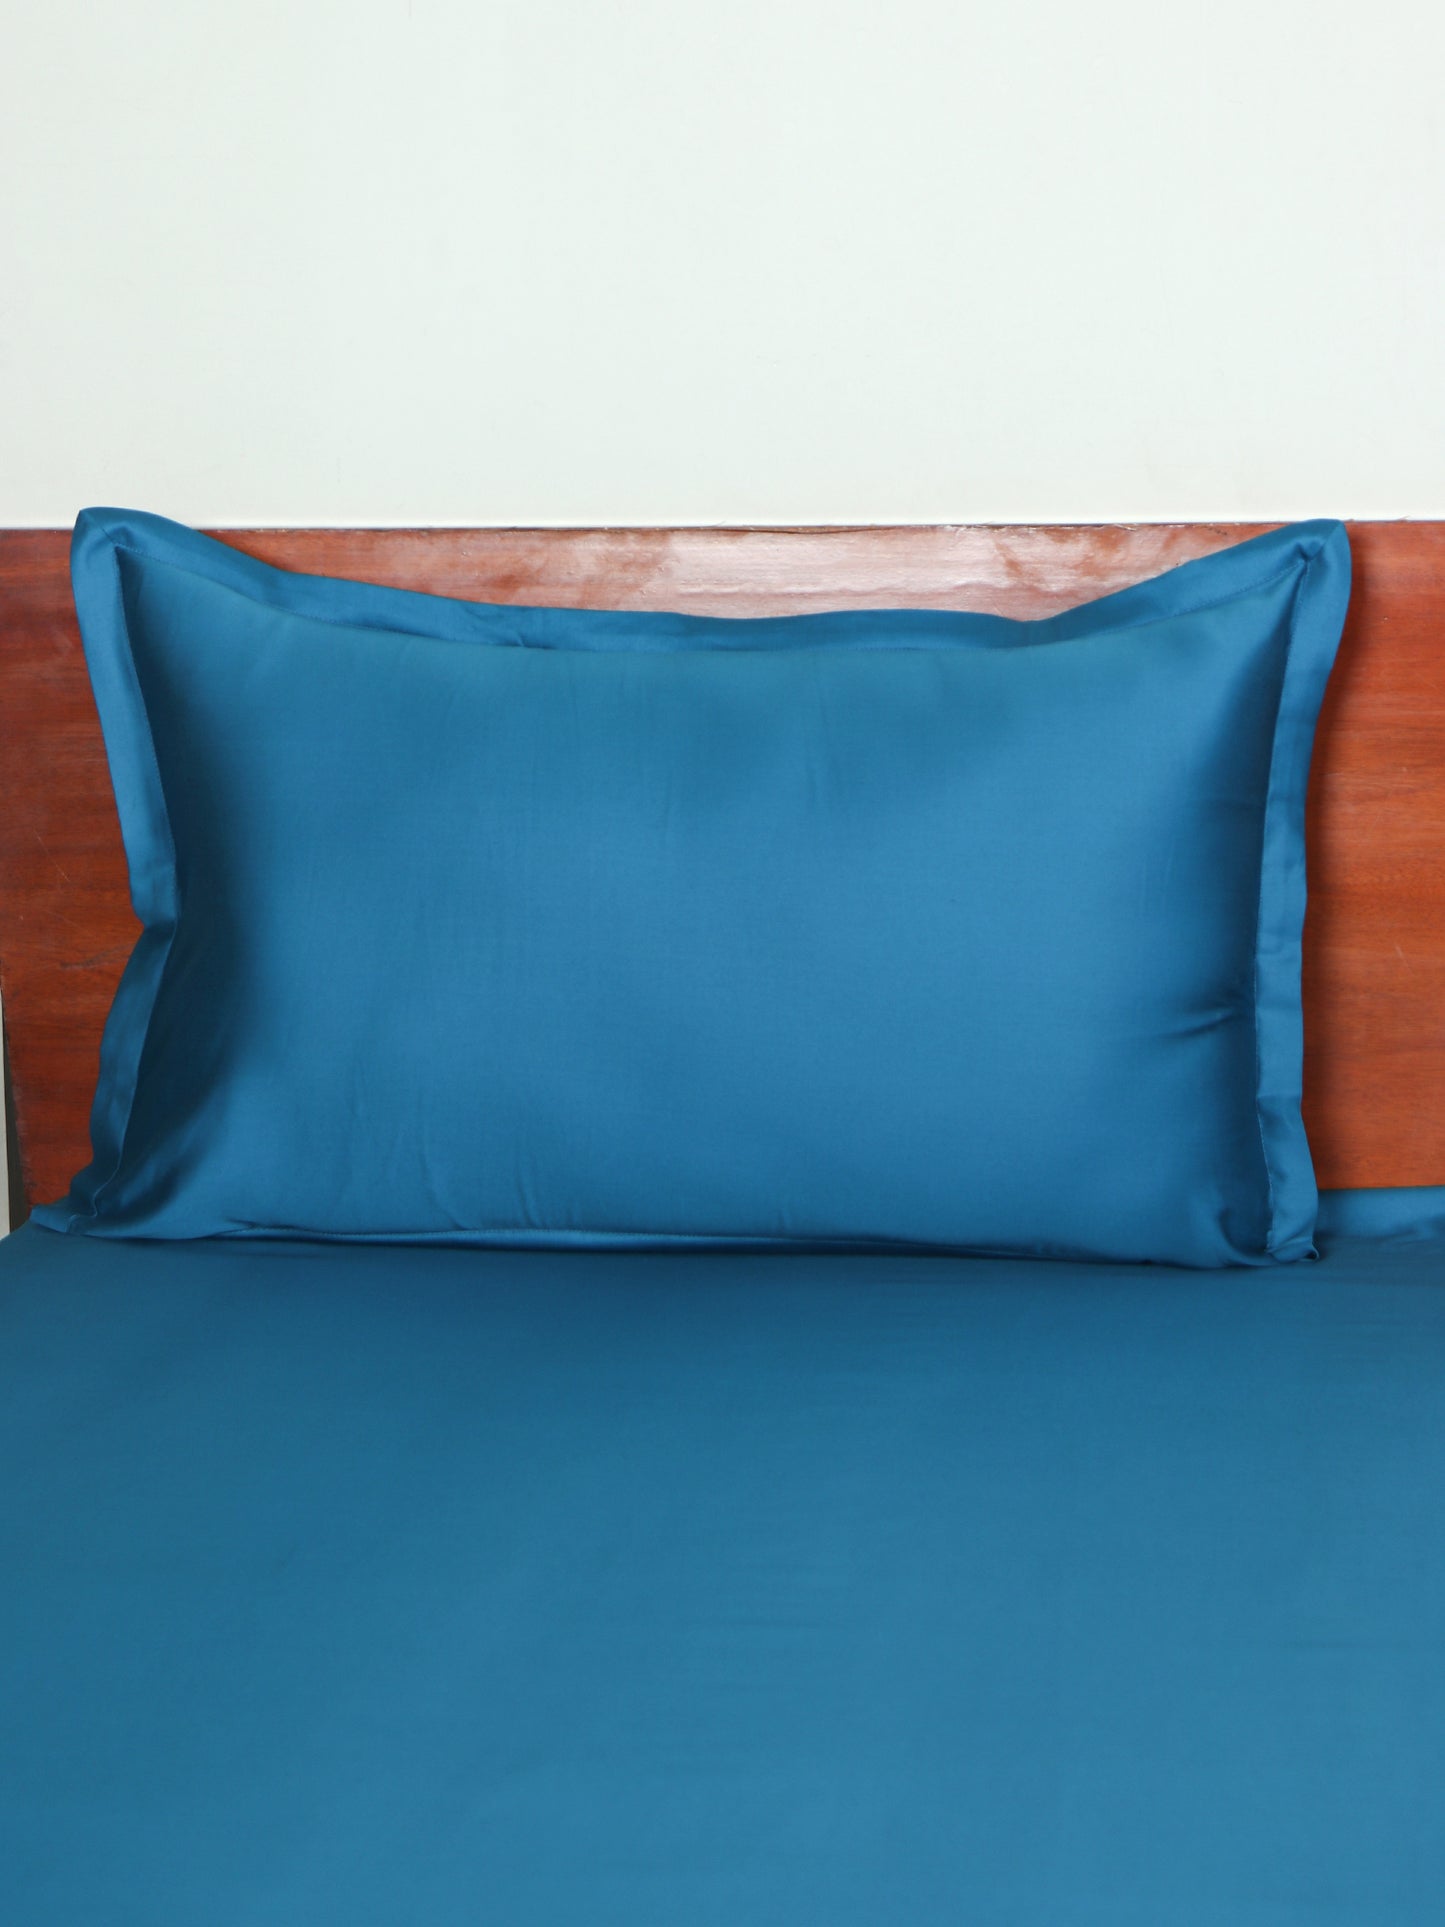 Bedsheet 100% Cotton 400TC for King Size Double Bed with Pillow Covers Teal Blue - Bedsheet 108x108inches, Pillow Covers 17x27inches